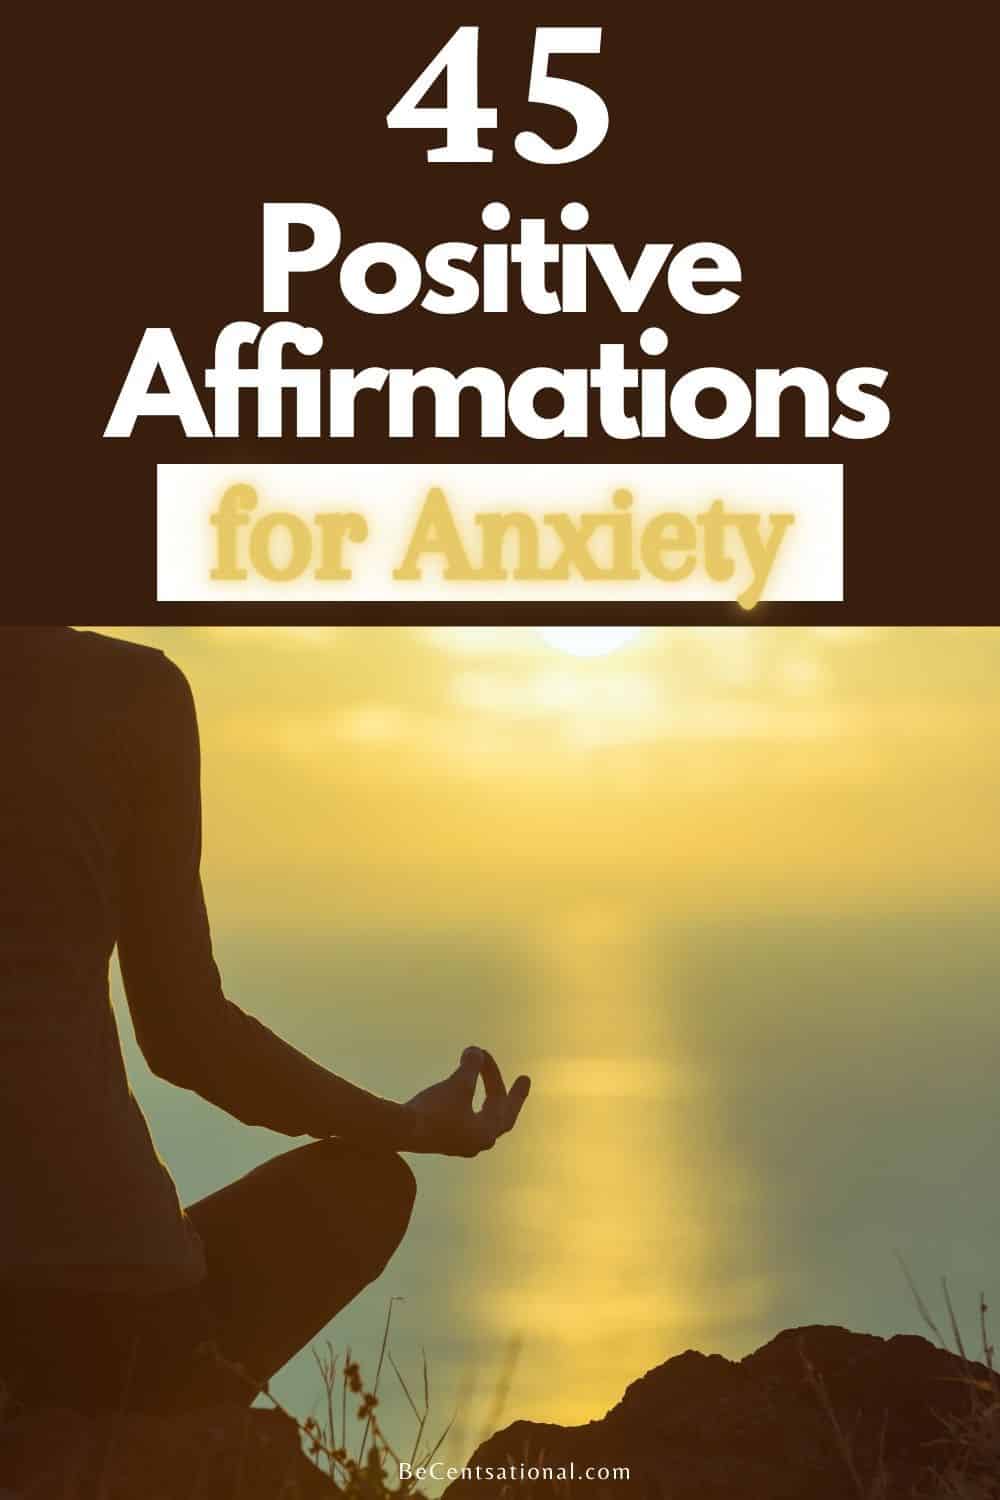 45 Positive Affirmations for Anxiety - Be Centsational